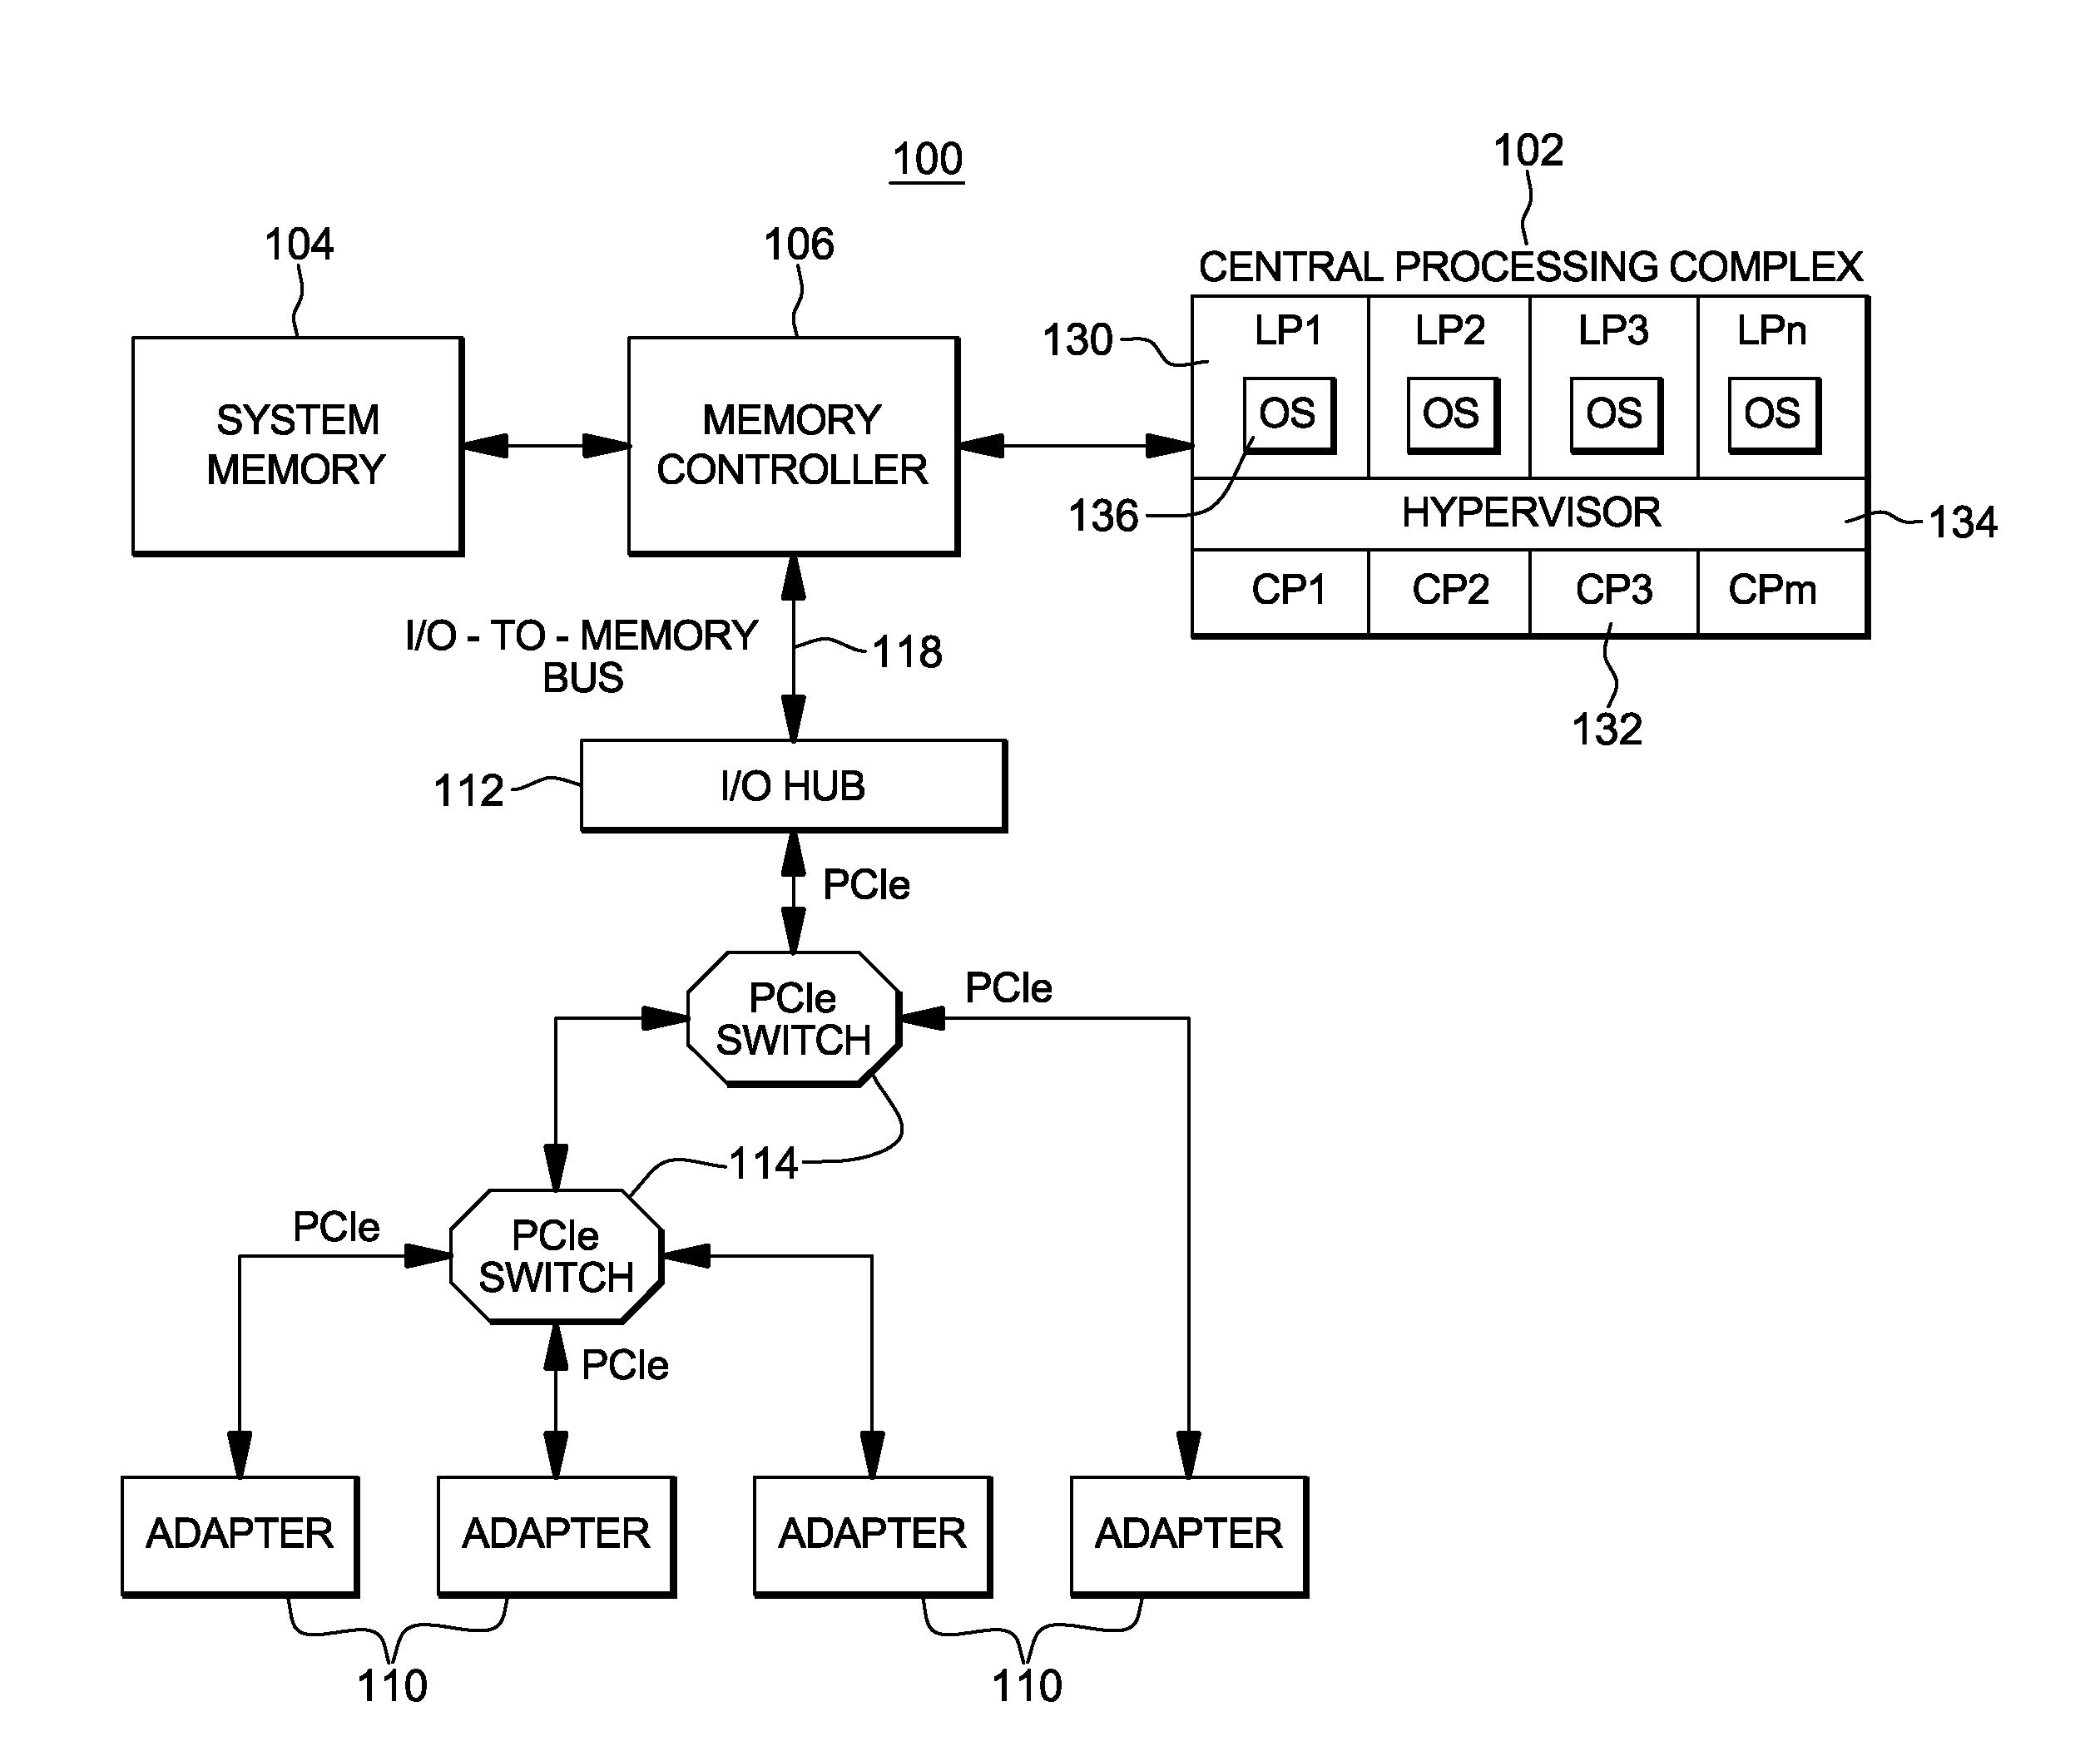 Managing processing associated with hardware events